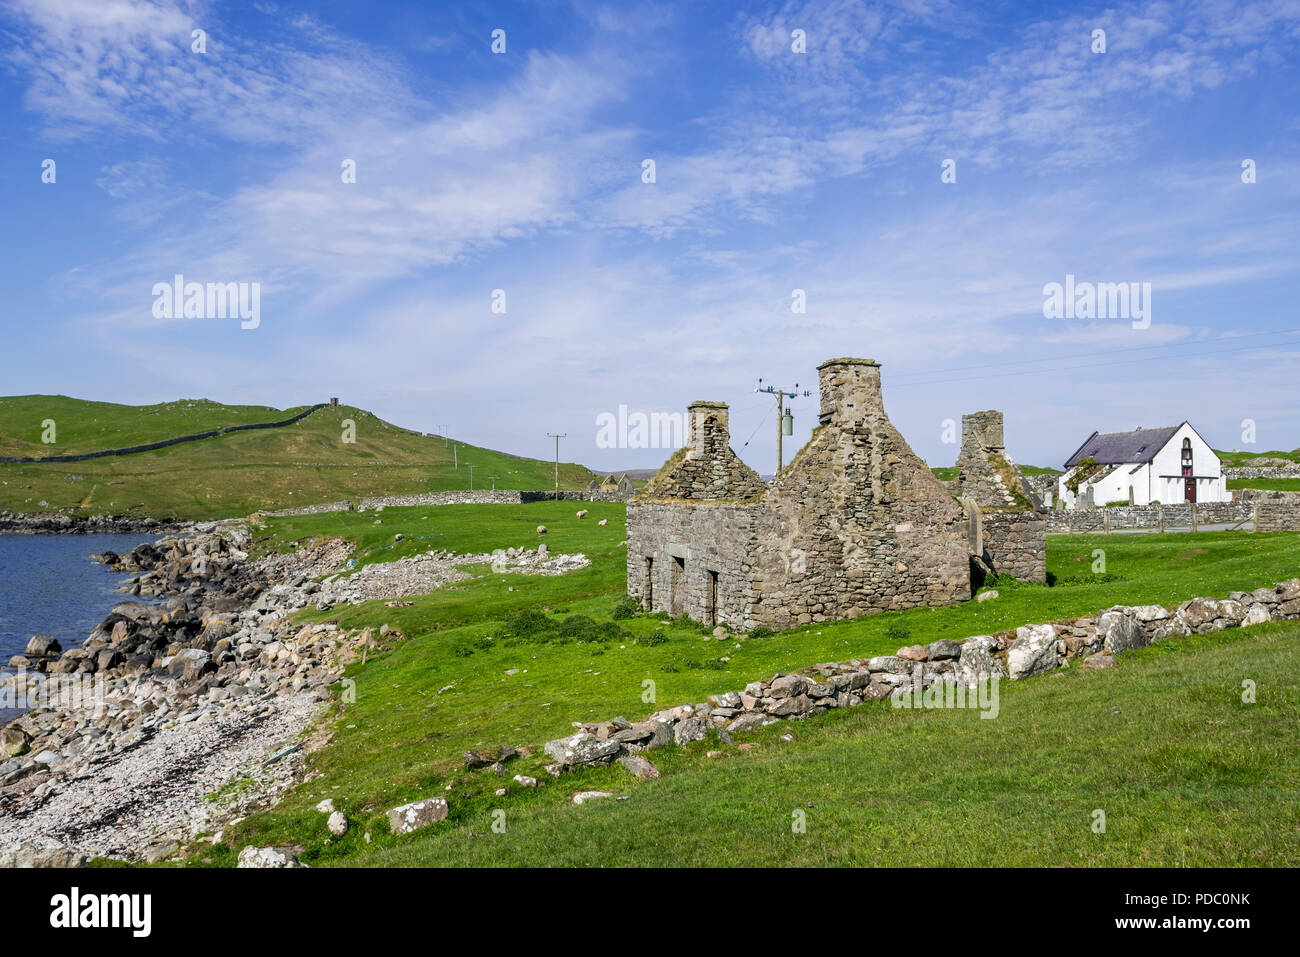 Ruin of old fishing booth and 18th century Lunna Kirk at East Lunna Voe, Lunna Ness, Mainland, Shetland Islands, Scotland, UK Stock Photo